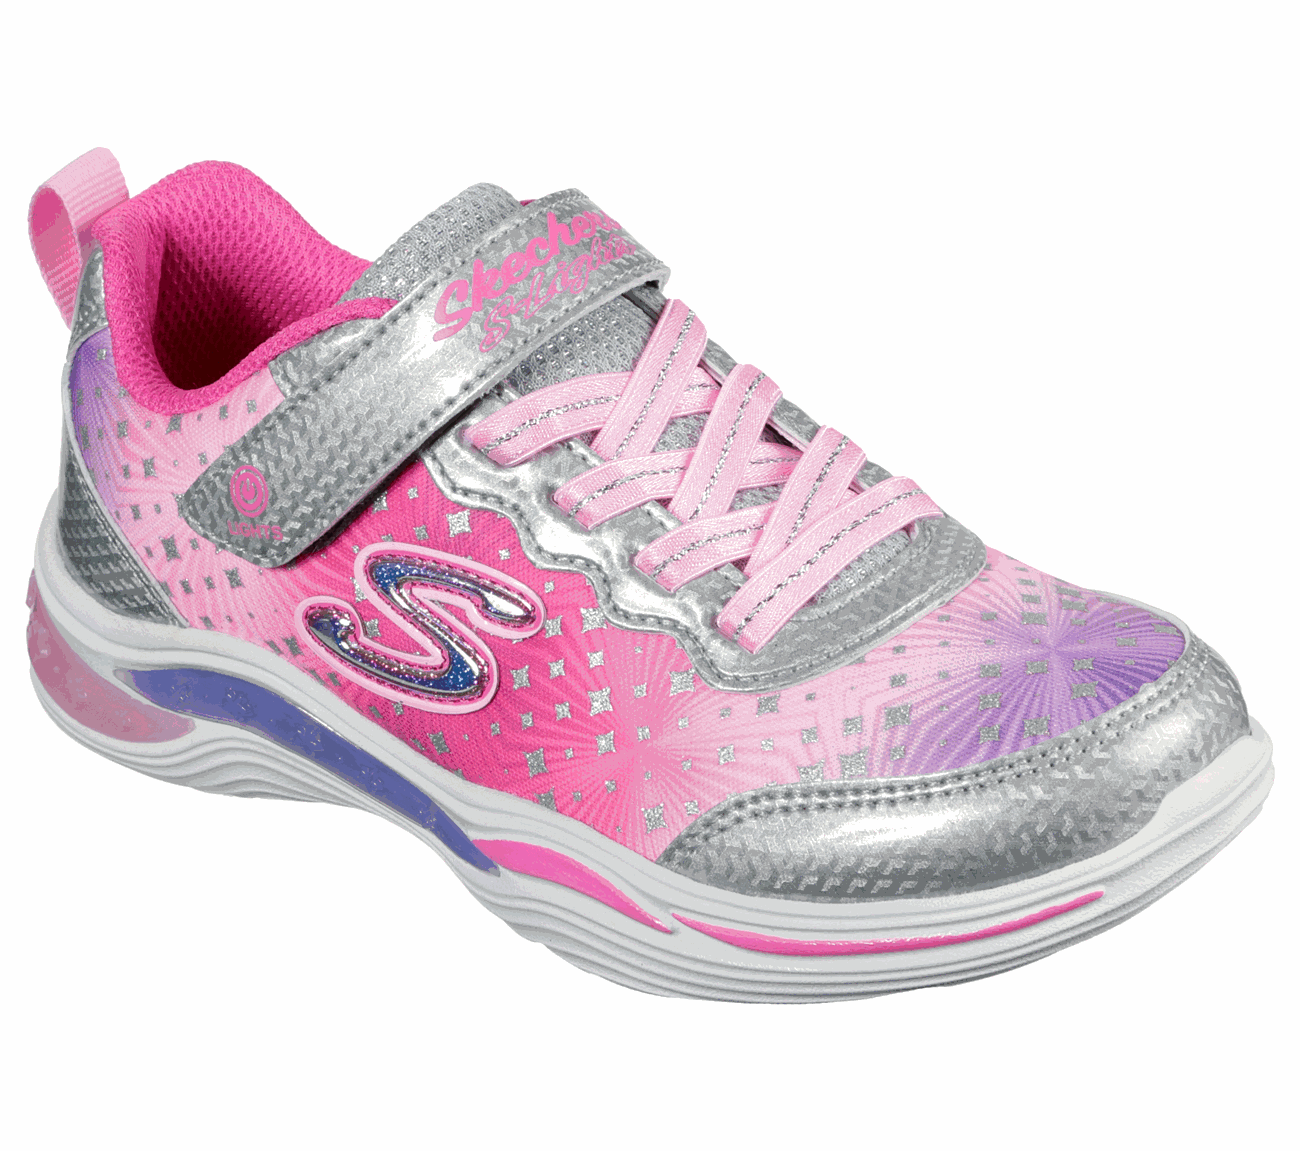 Painted Daisy SKECHERS S-Lights Shoes